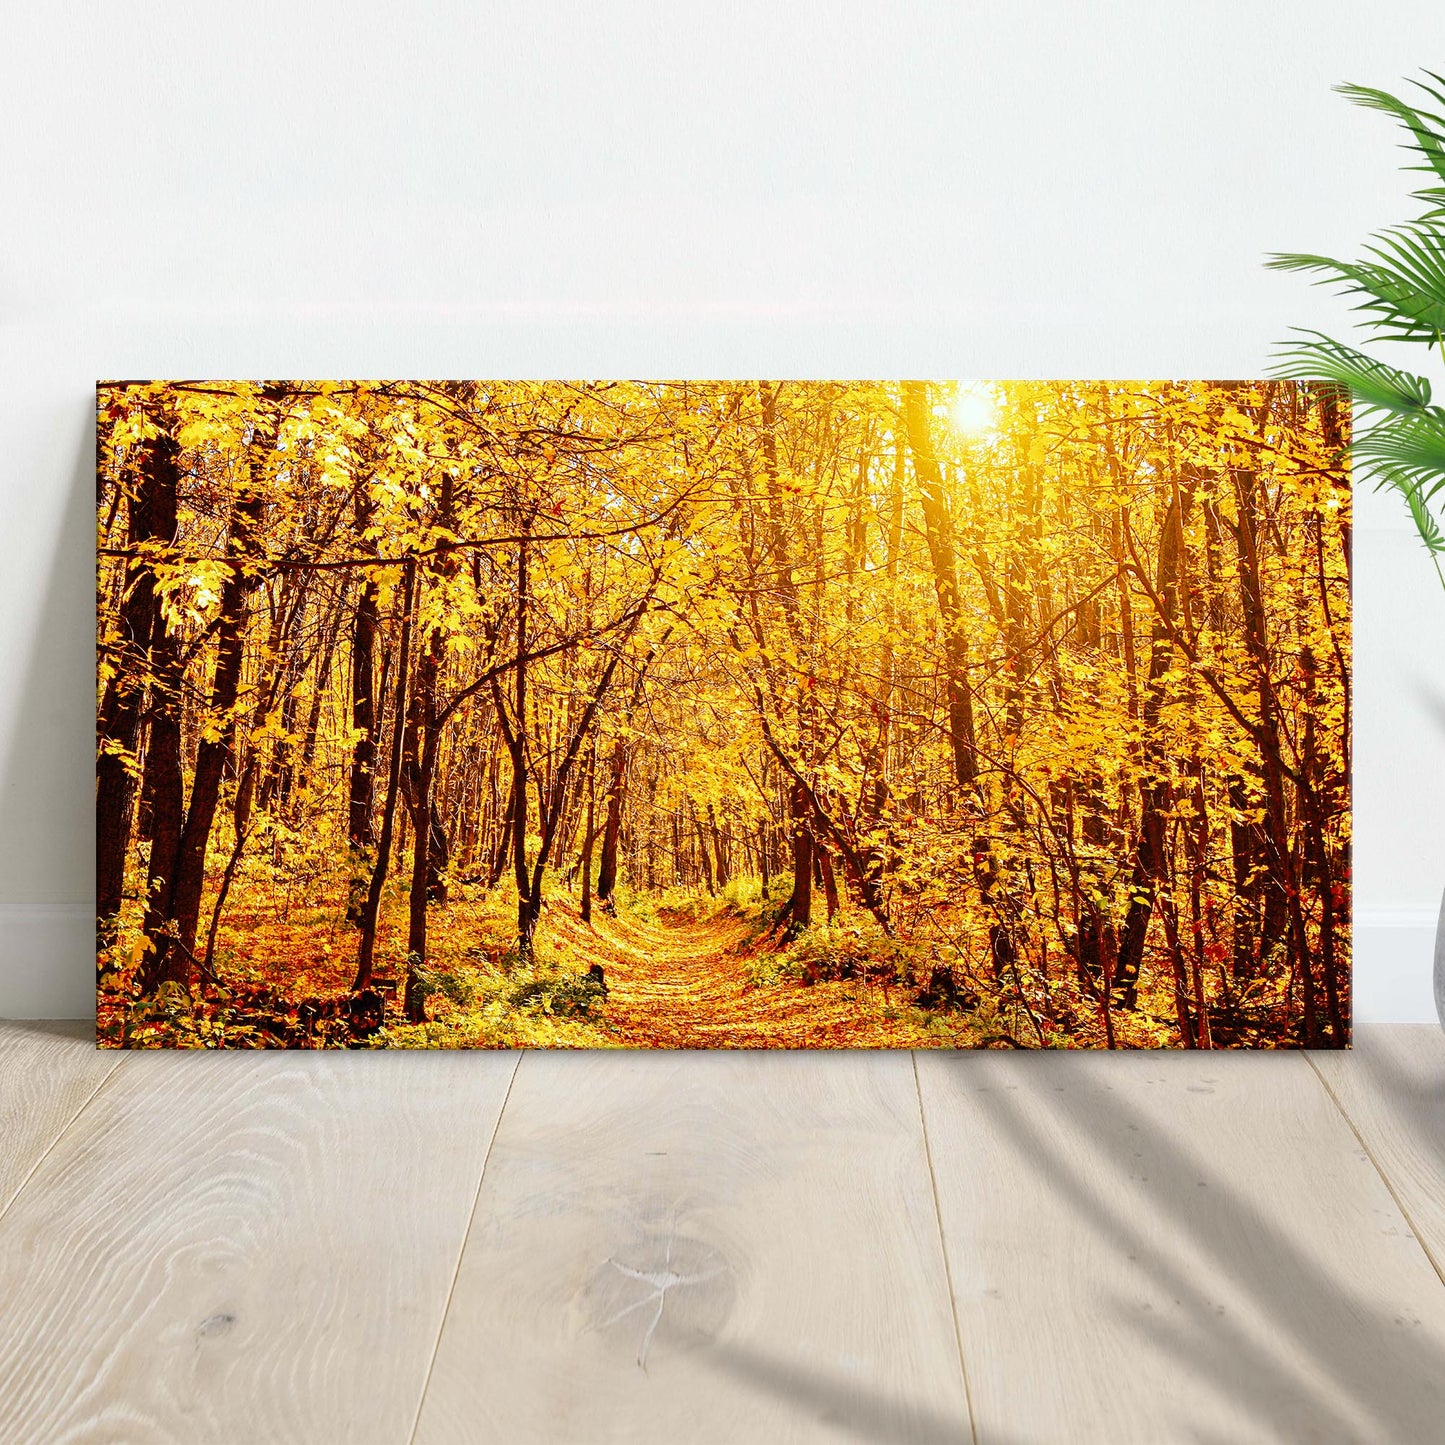 Yellow Autumn Forest Canvas Wall Art - Image by Tailored Canvases